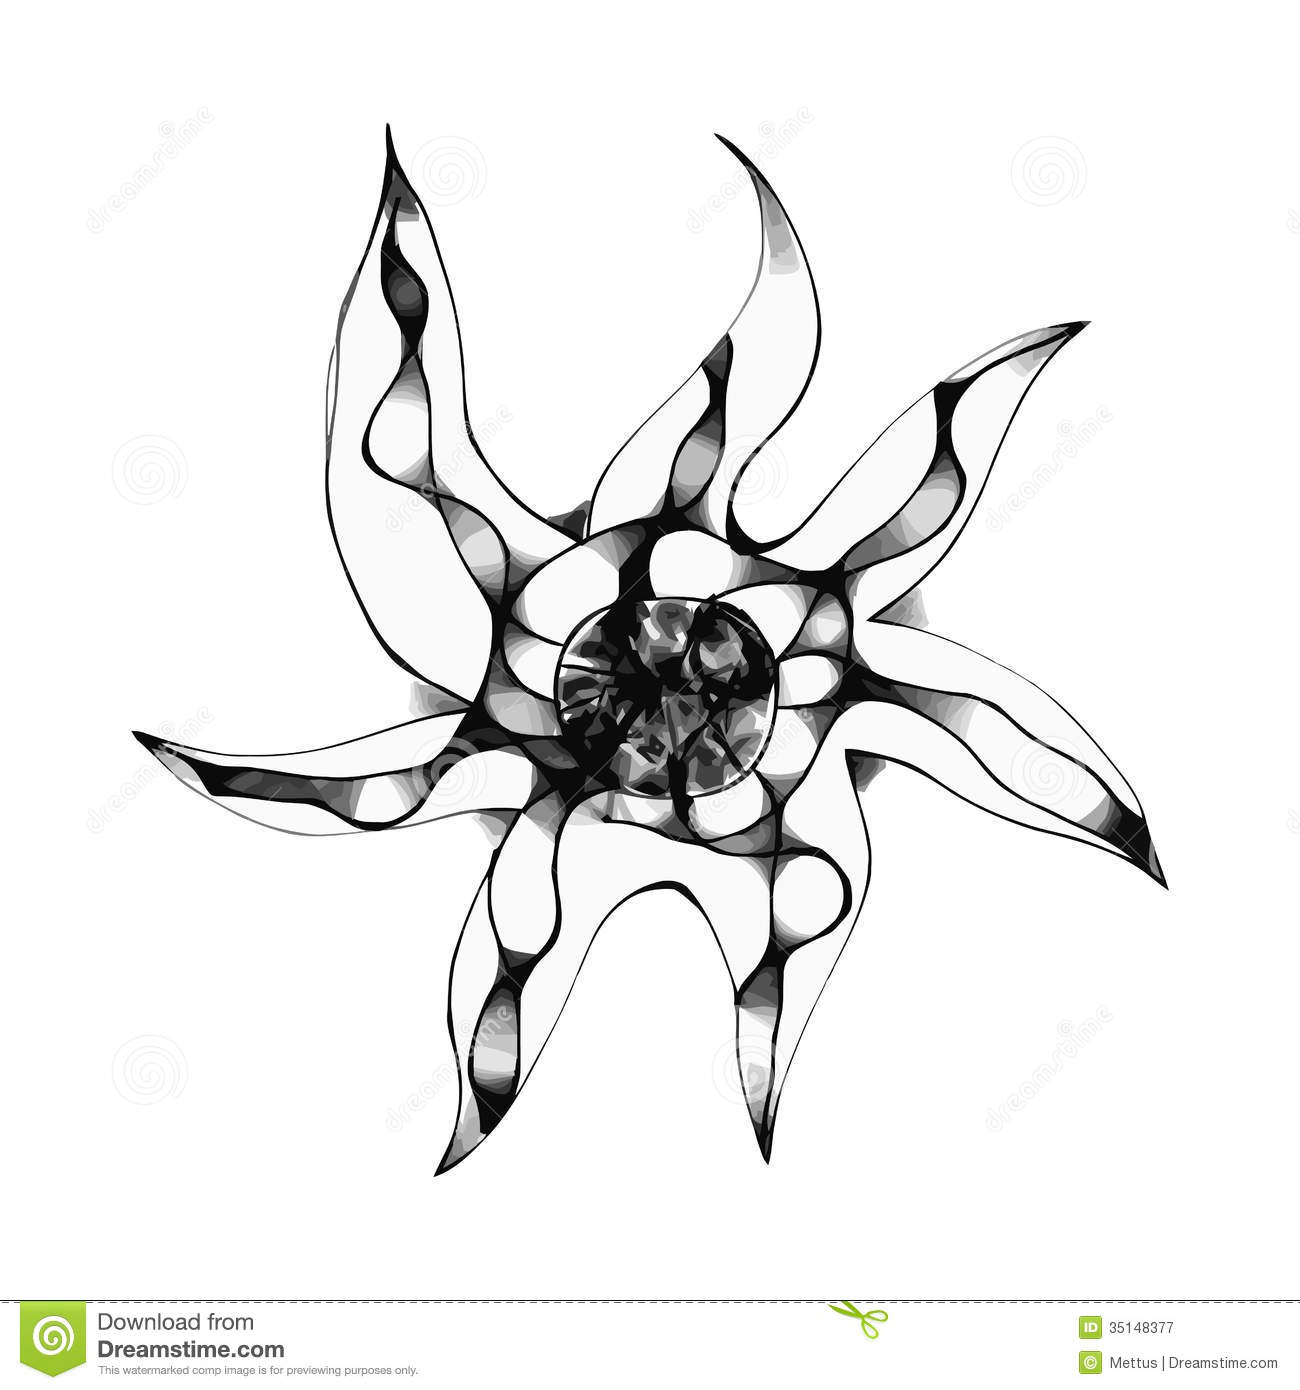 Hand Drawn Star Royalty Free Stock Photography   Image  35148377